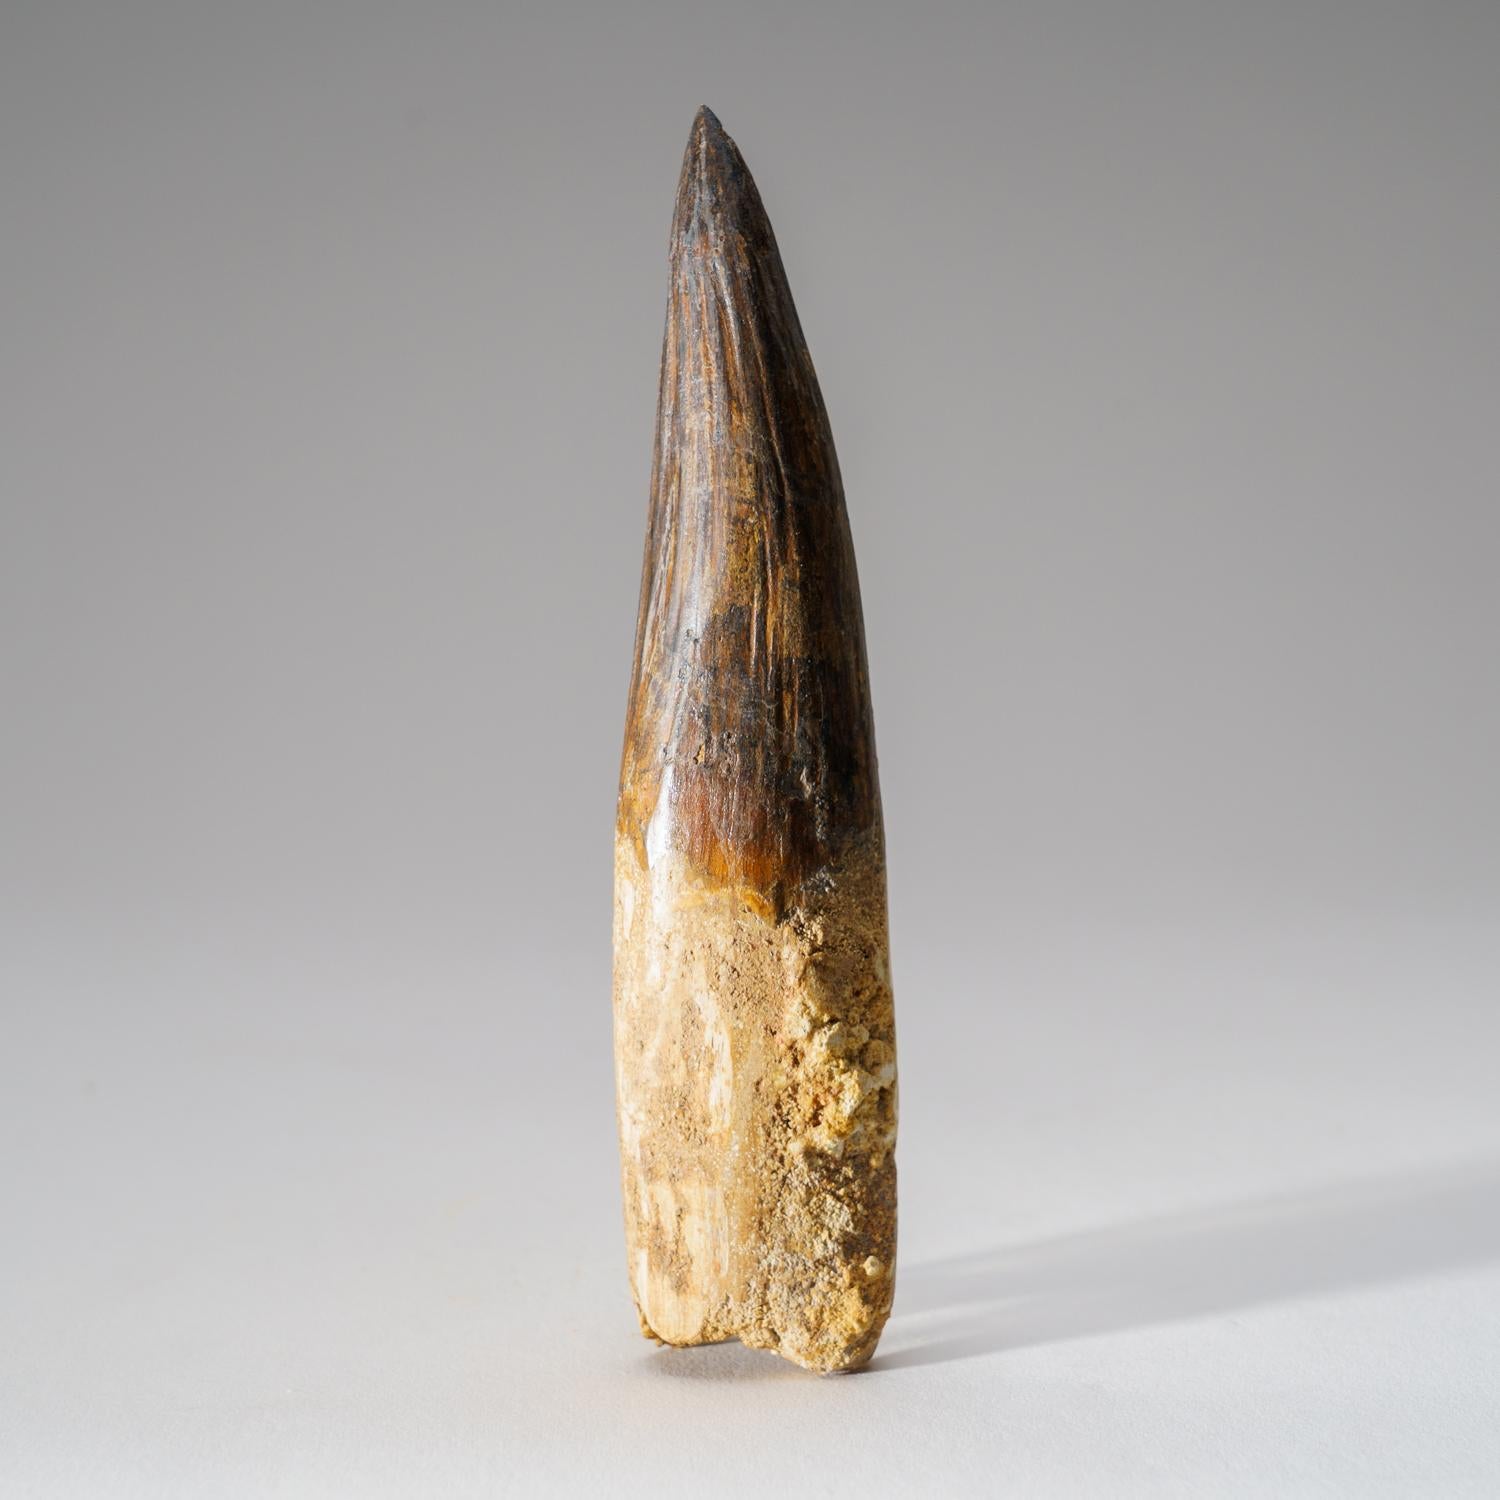 18th Century and Earlier Genuine Mosasaurus Tooth in Display Case (197.4 grams) For Sale